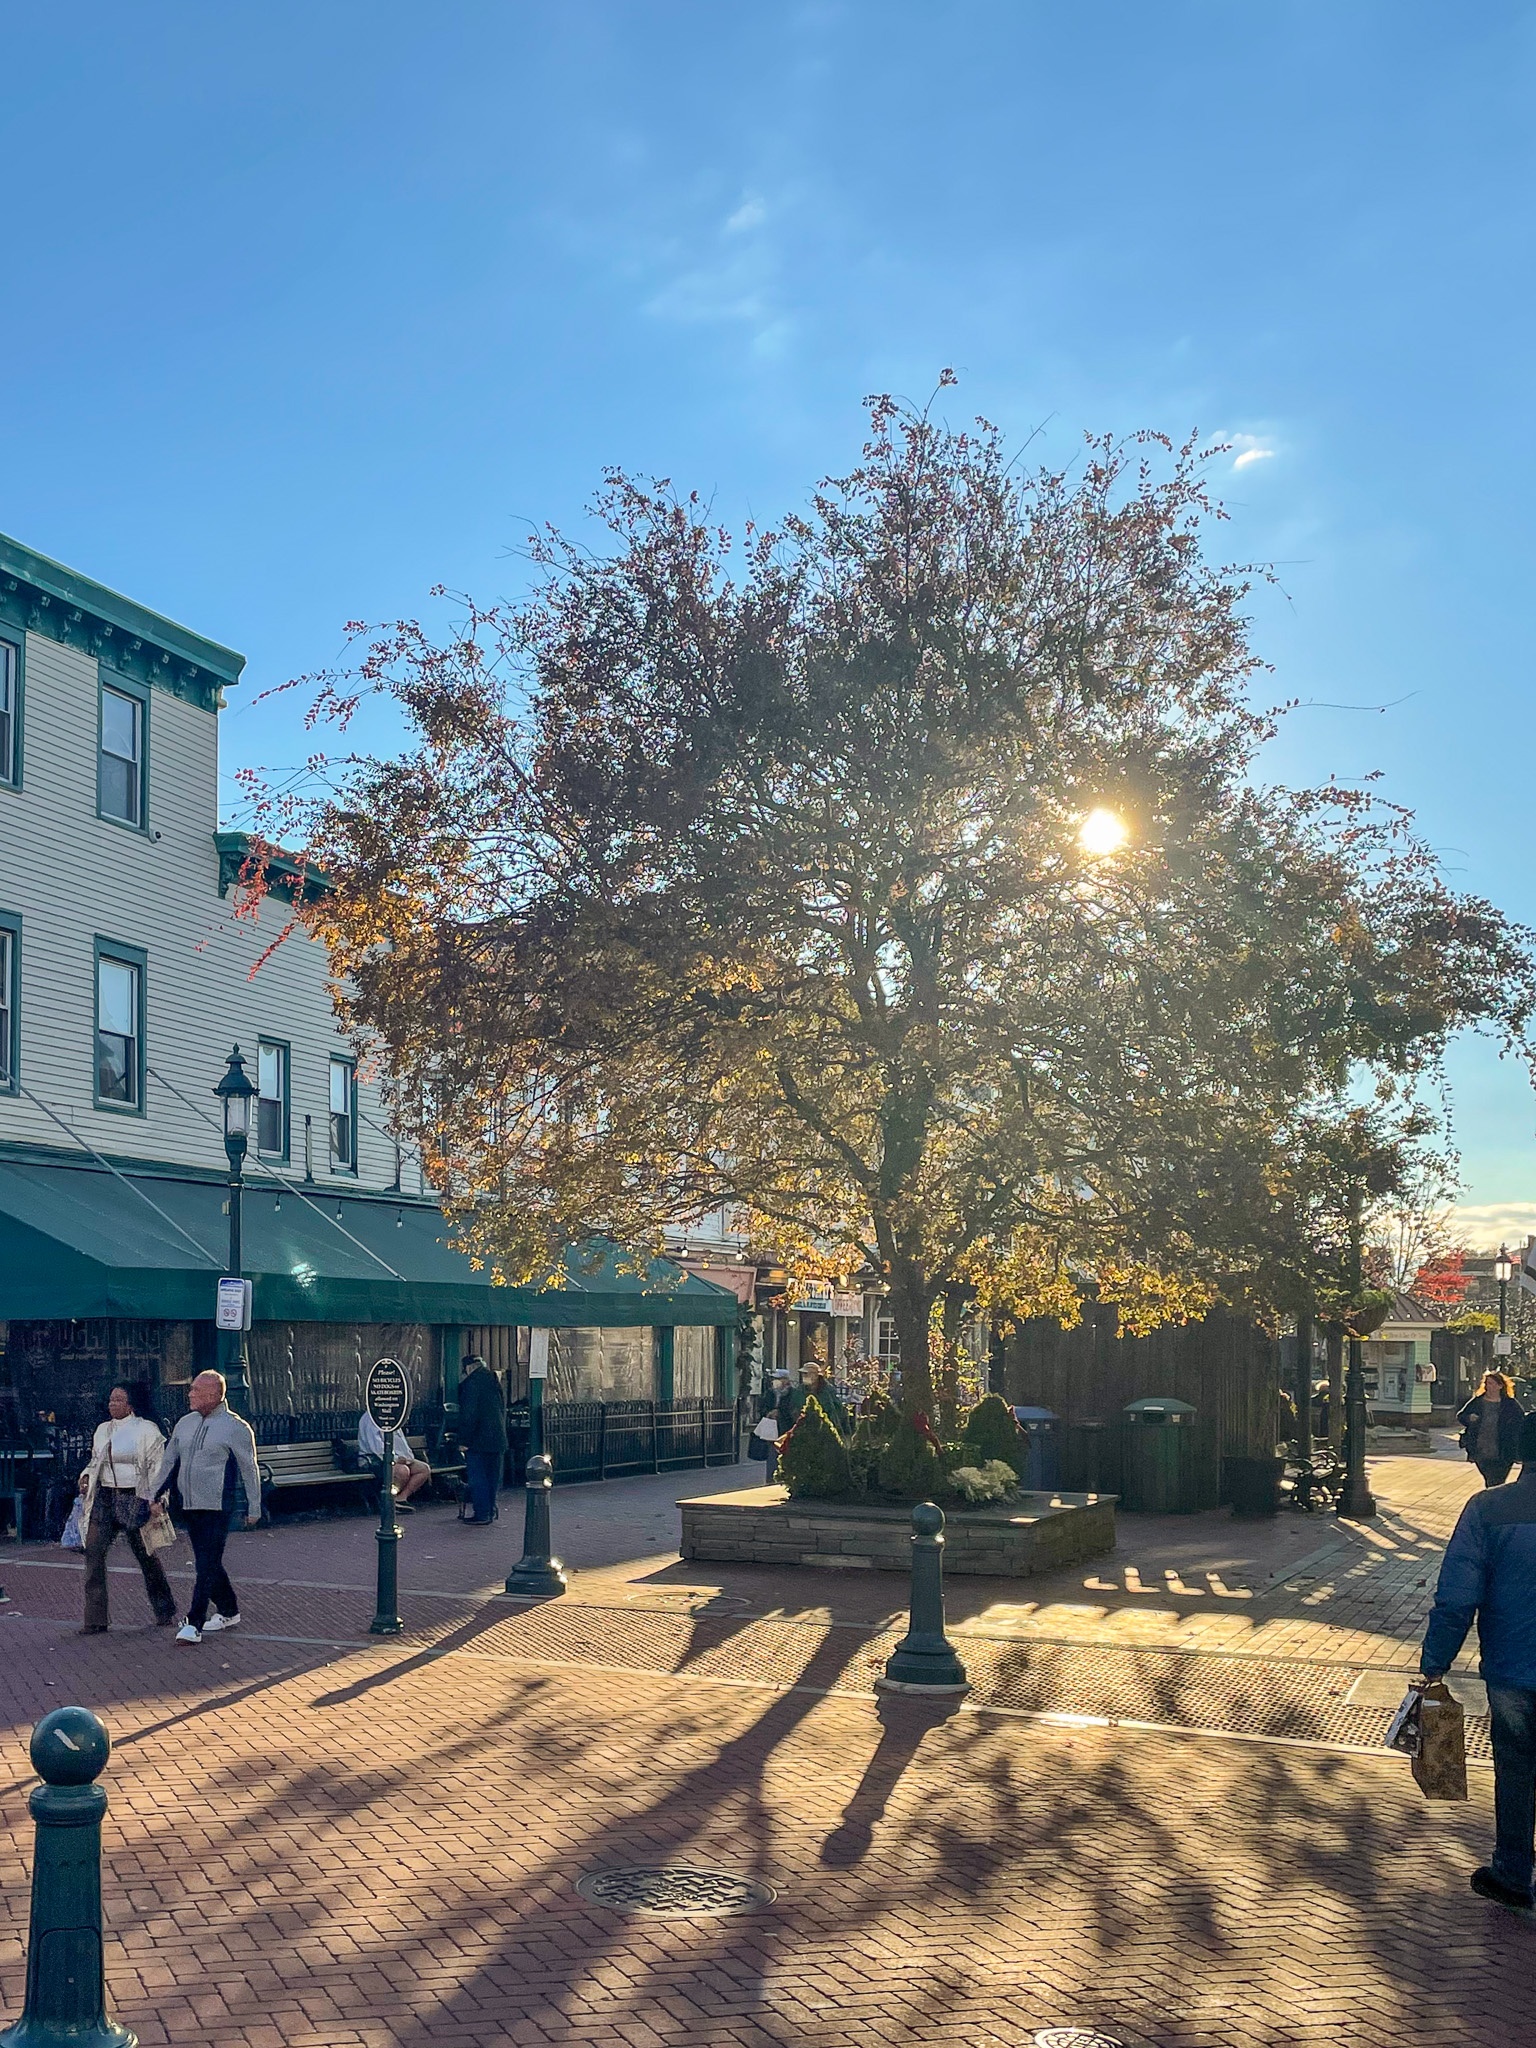 Last Leaves of November on the Washington Street Mall. The sun is shinning through the leaves and people are shopping.